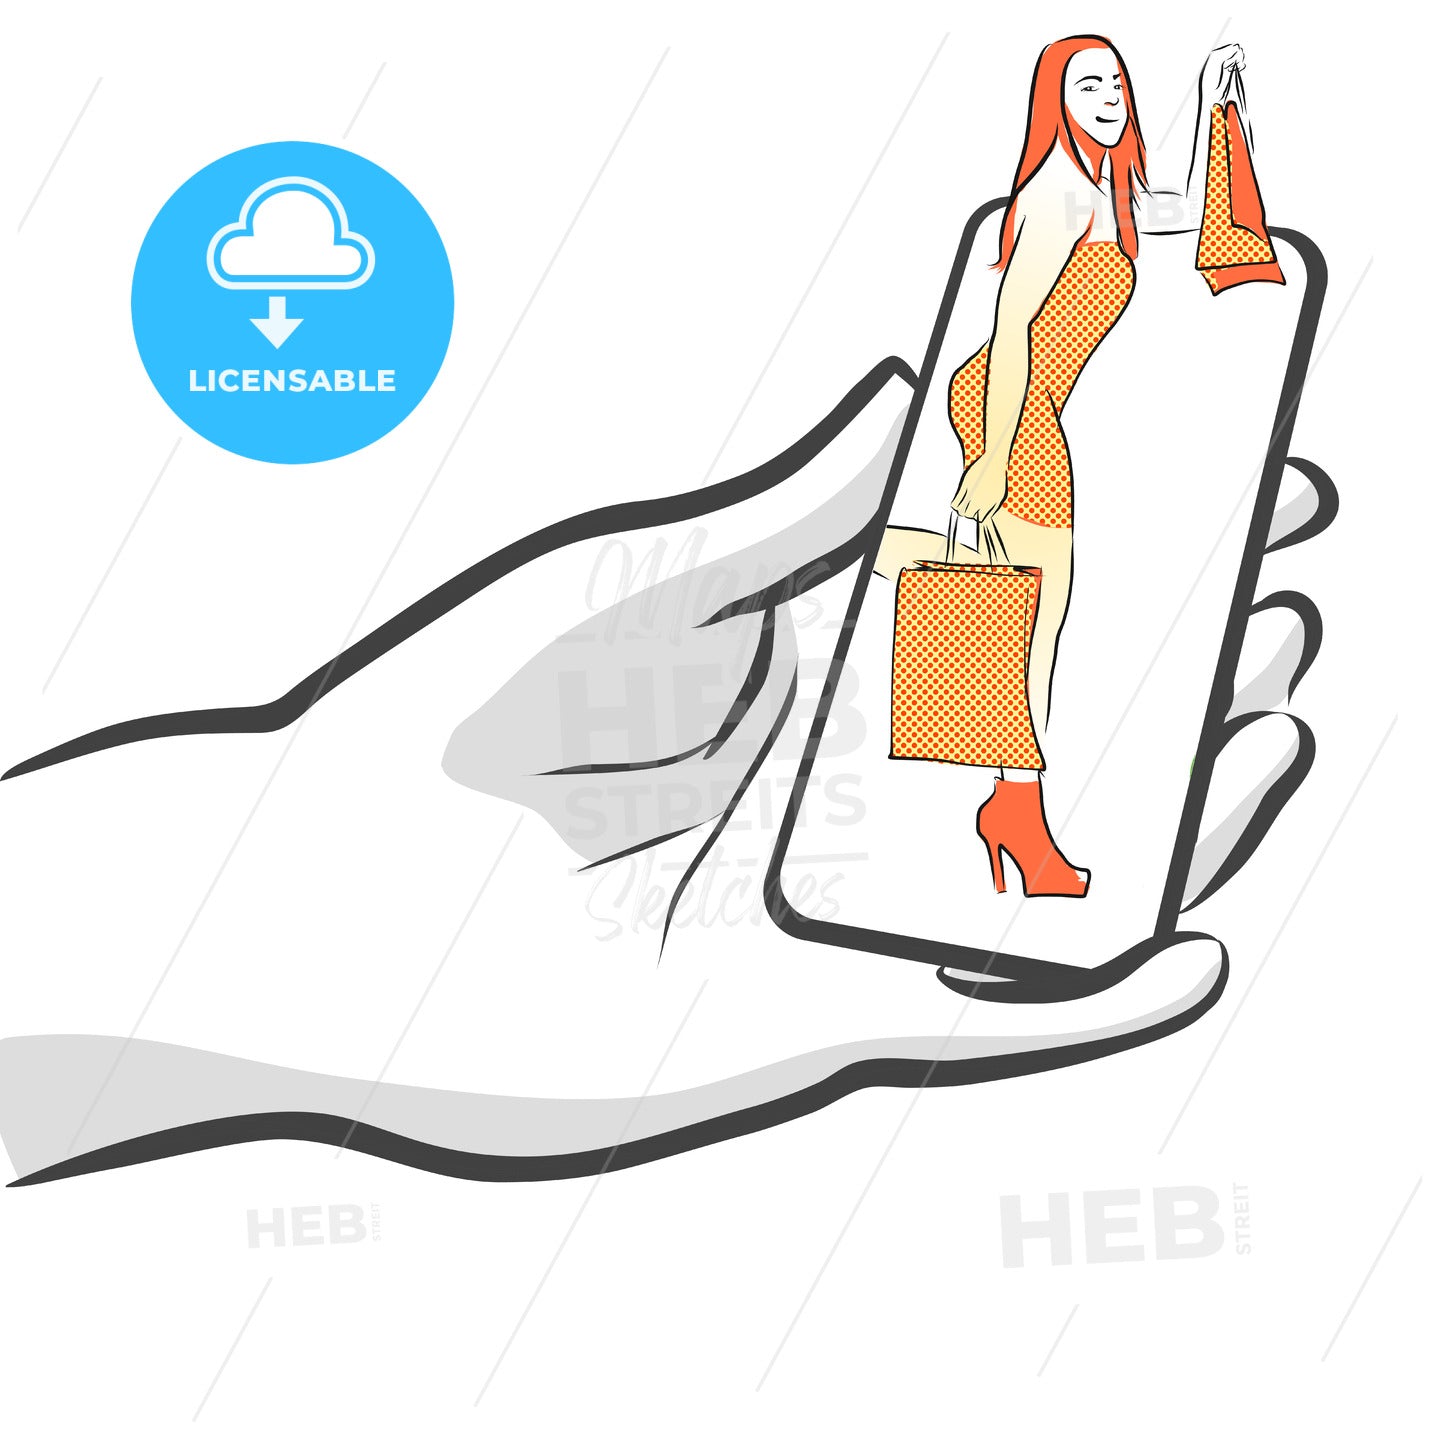 Female with Bags on Smartphone, Concept – instant download